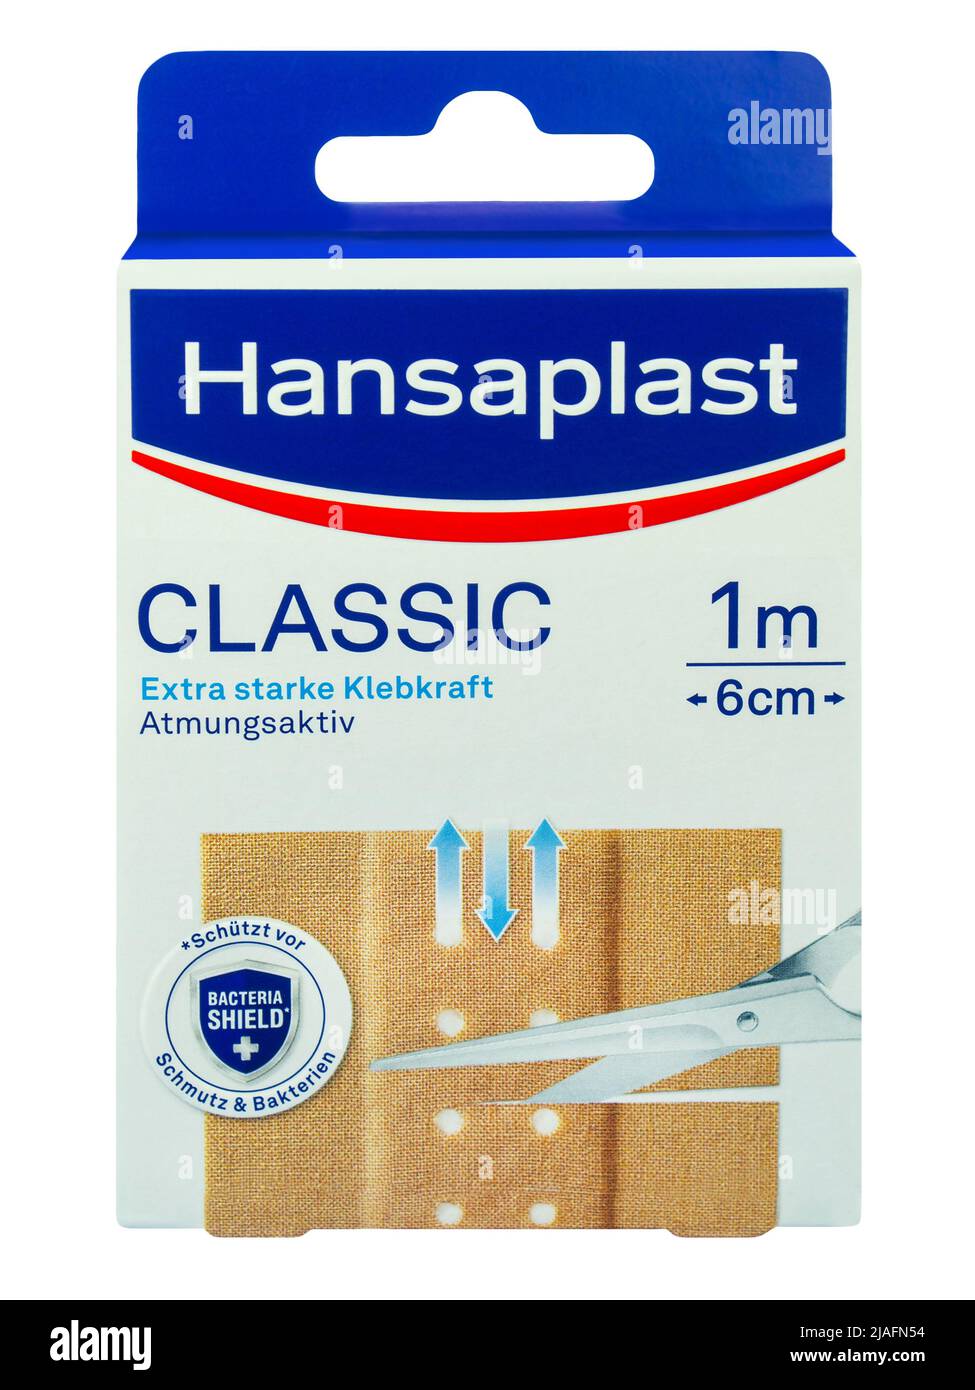 Hansaplast Cut Out Stock Images & Pictures - Alamy